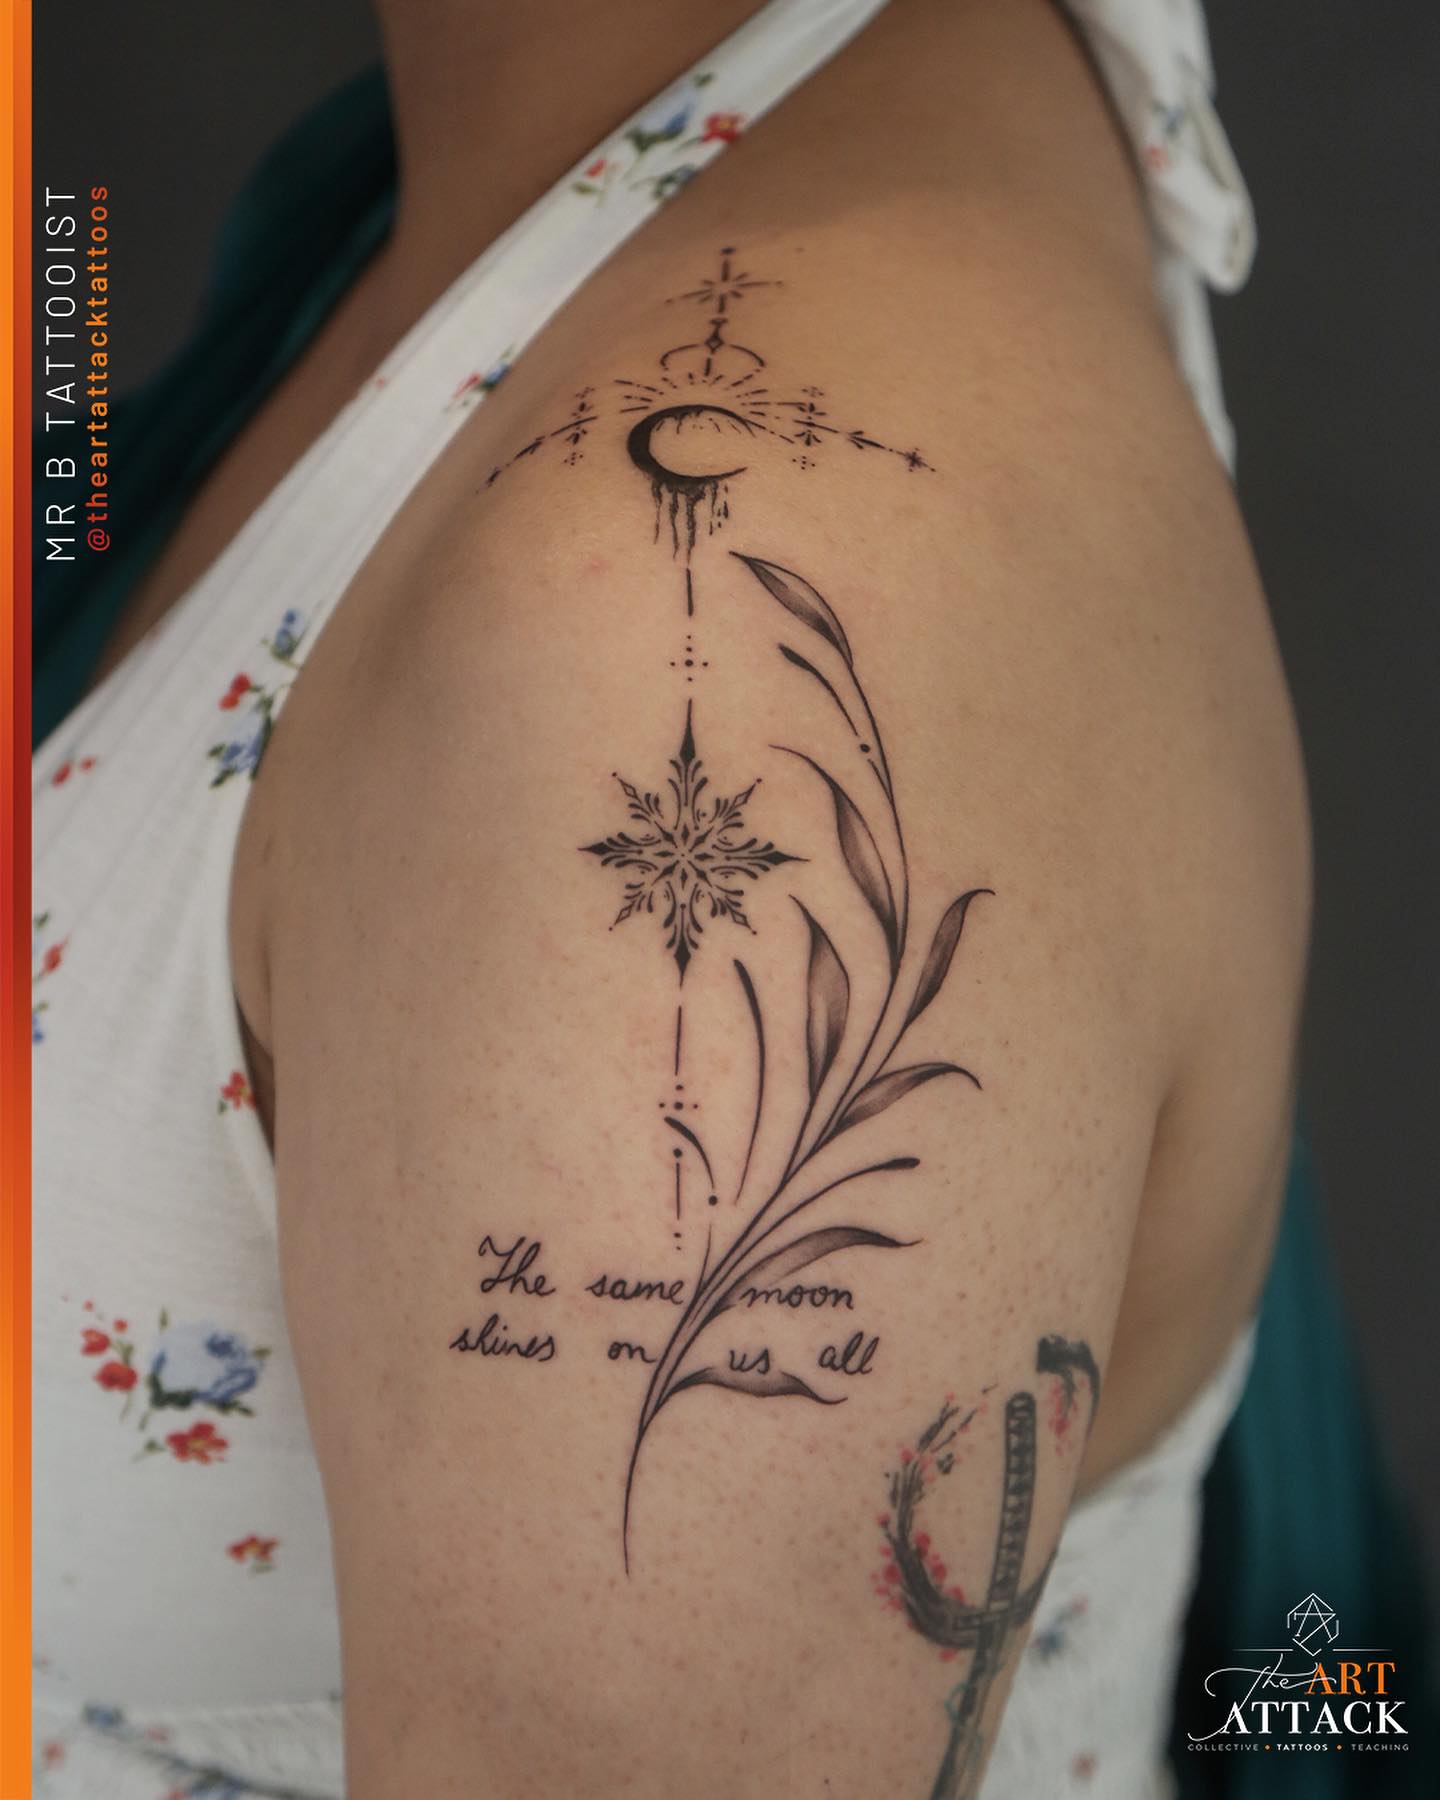 Elegant line art celestial and floral tattoo with script